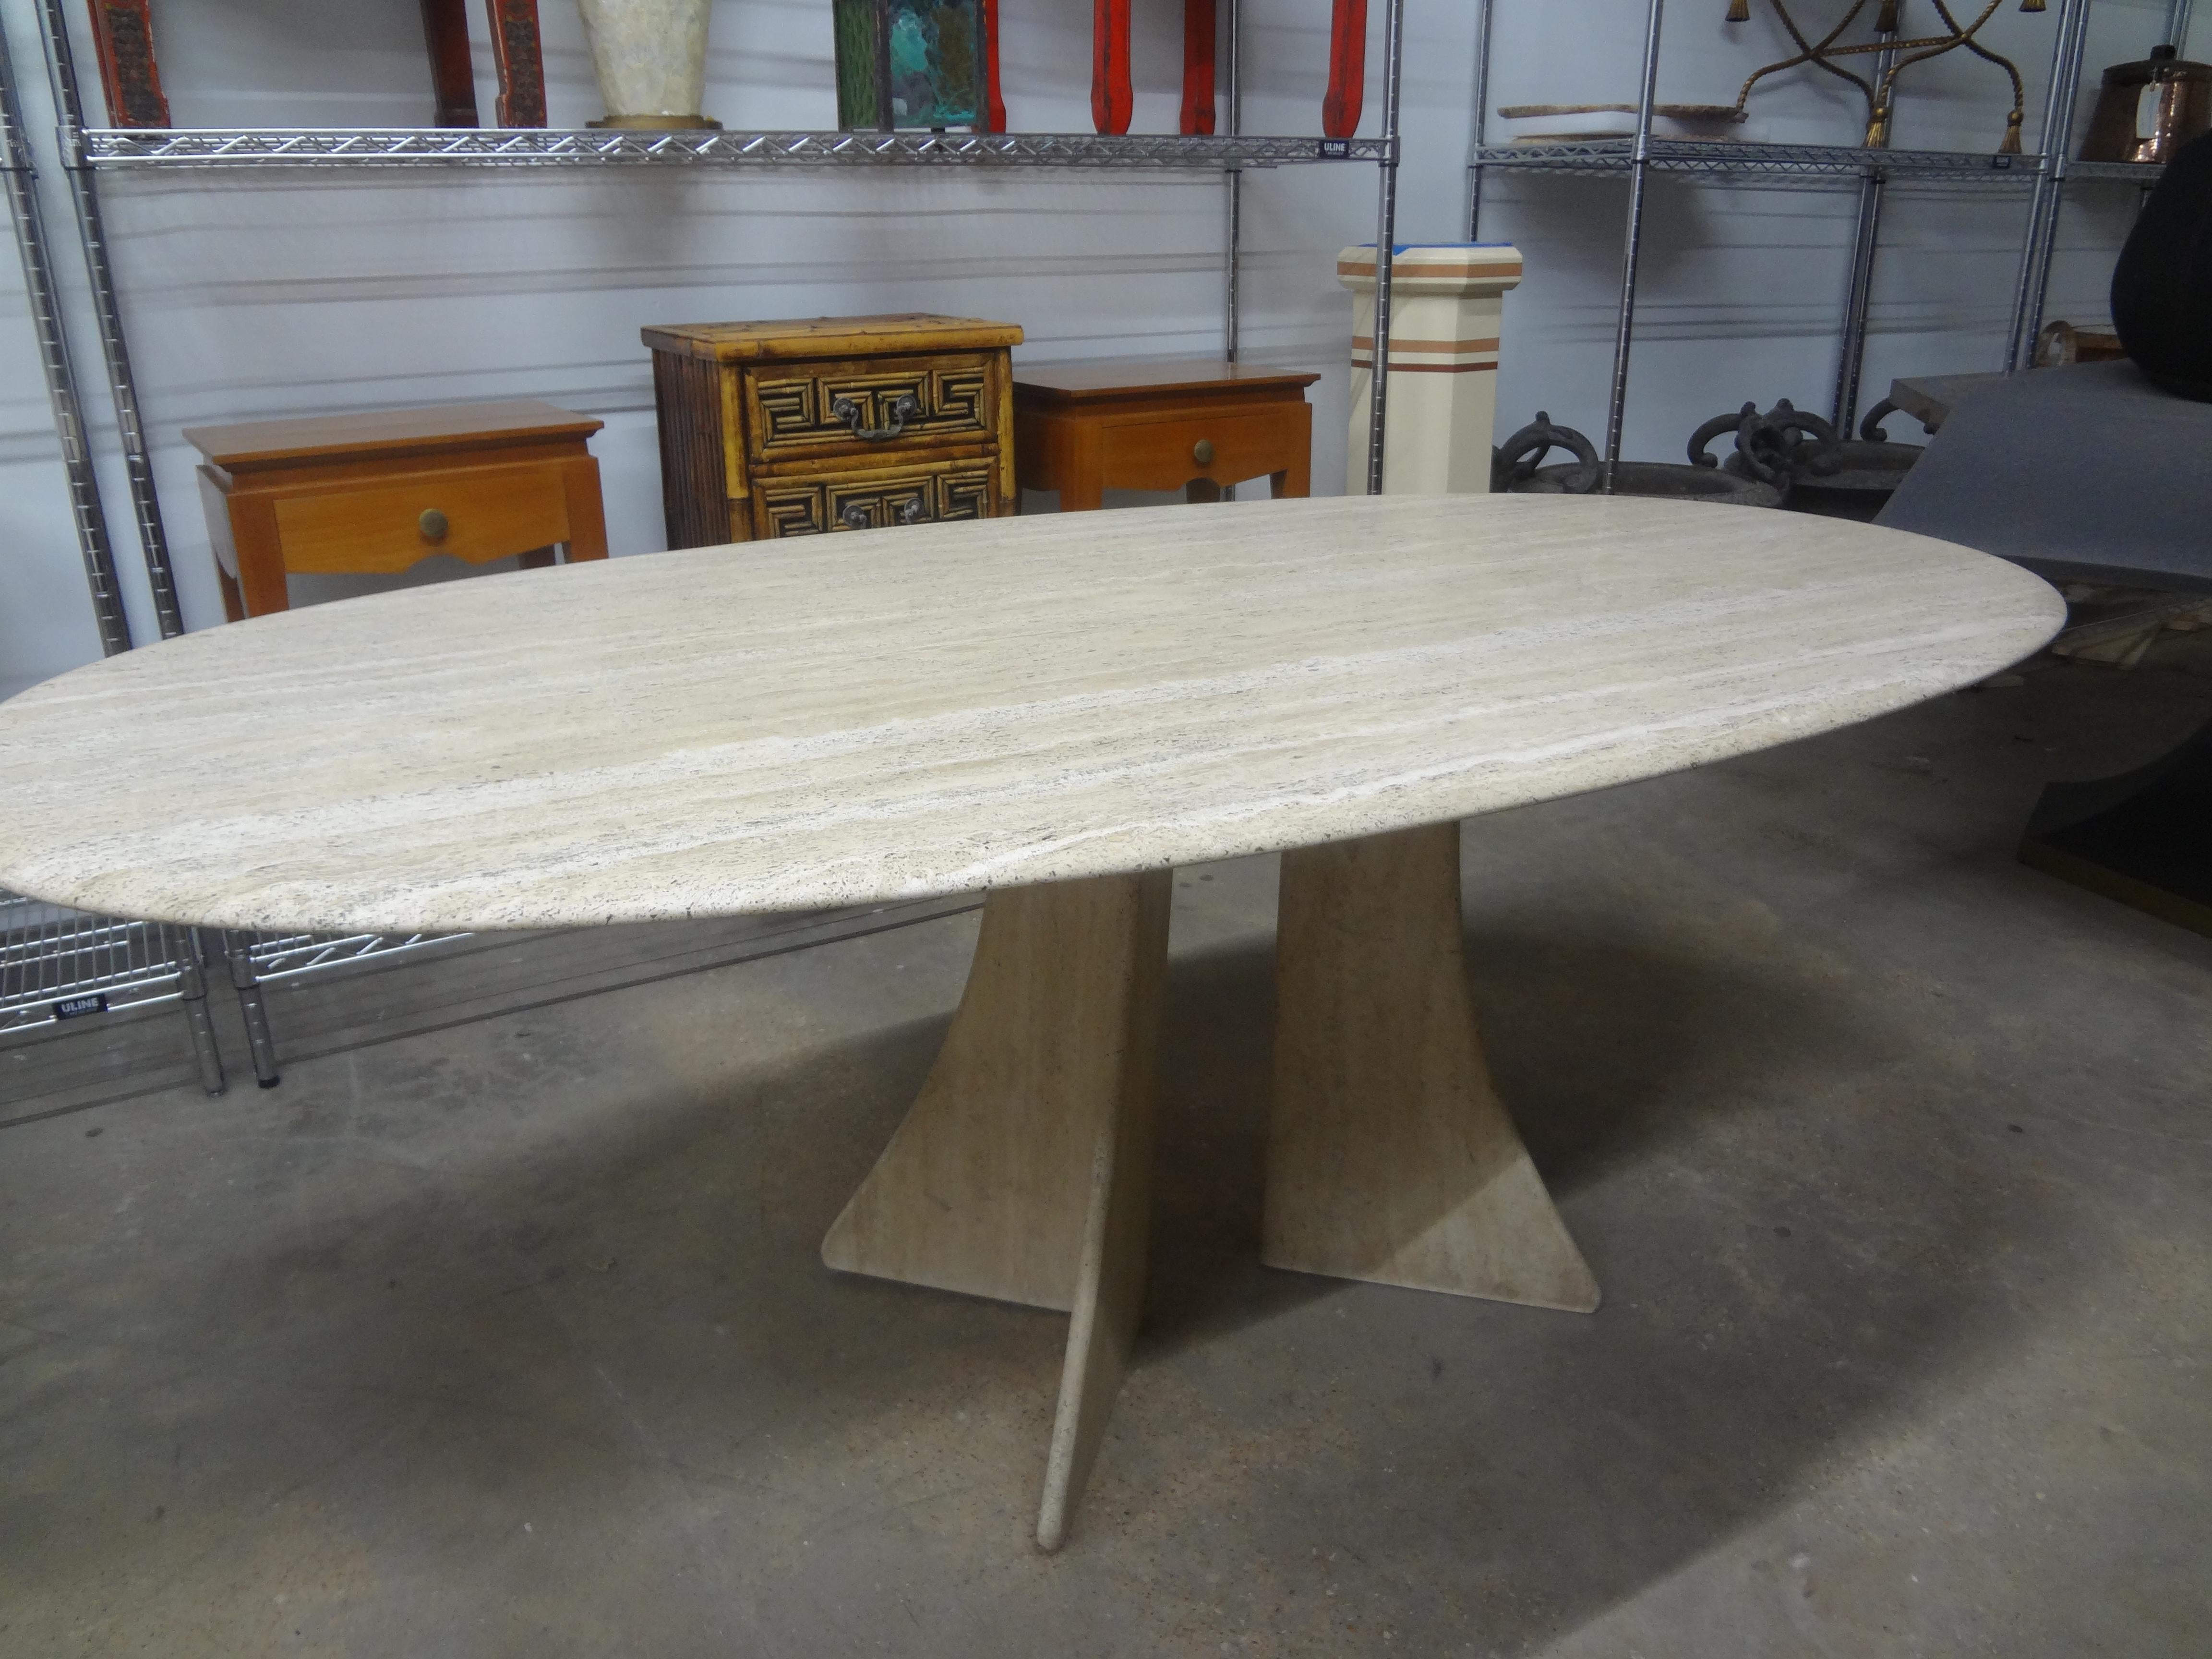 Late 20th Century Italian Modern Oval Travertine Dining Table Attributed to Angelo Mangiarotti